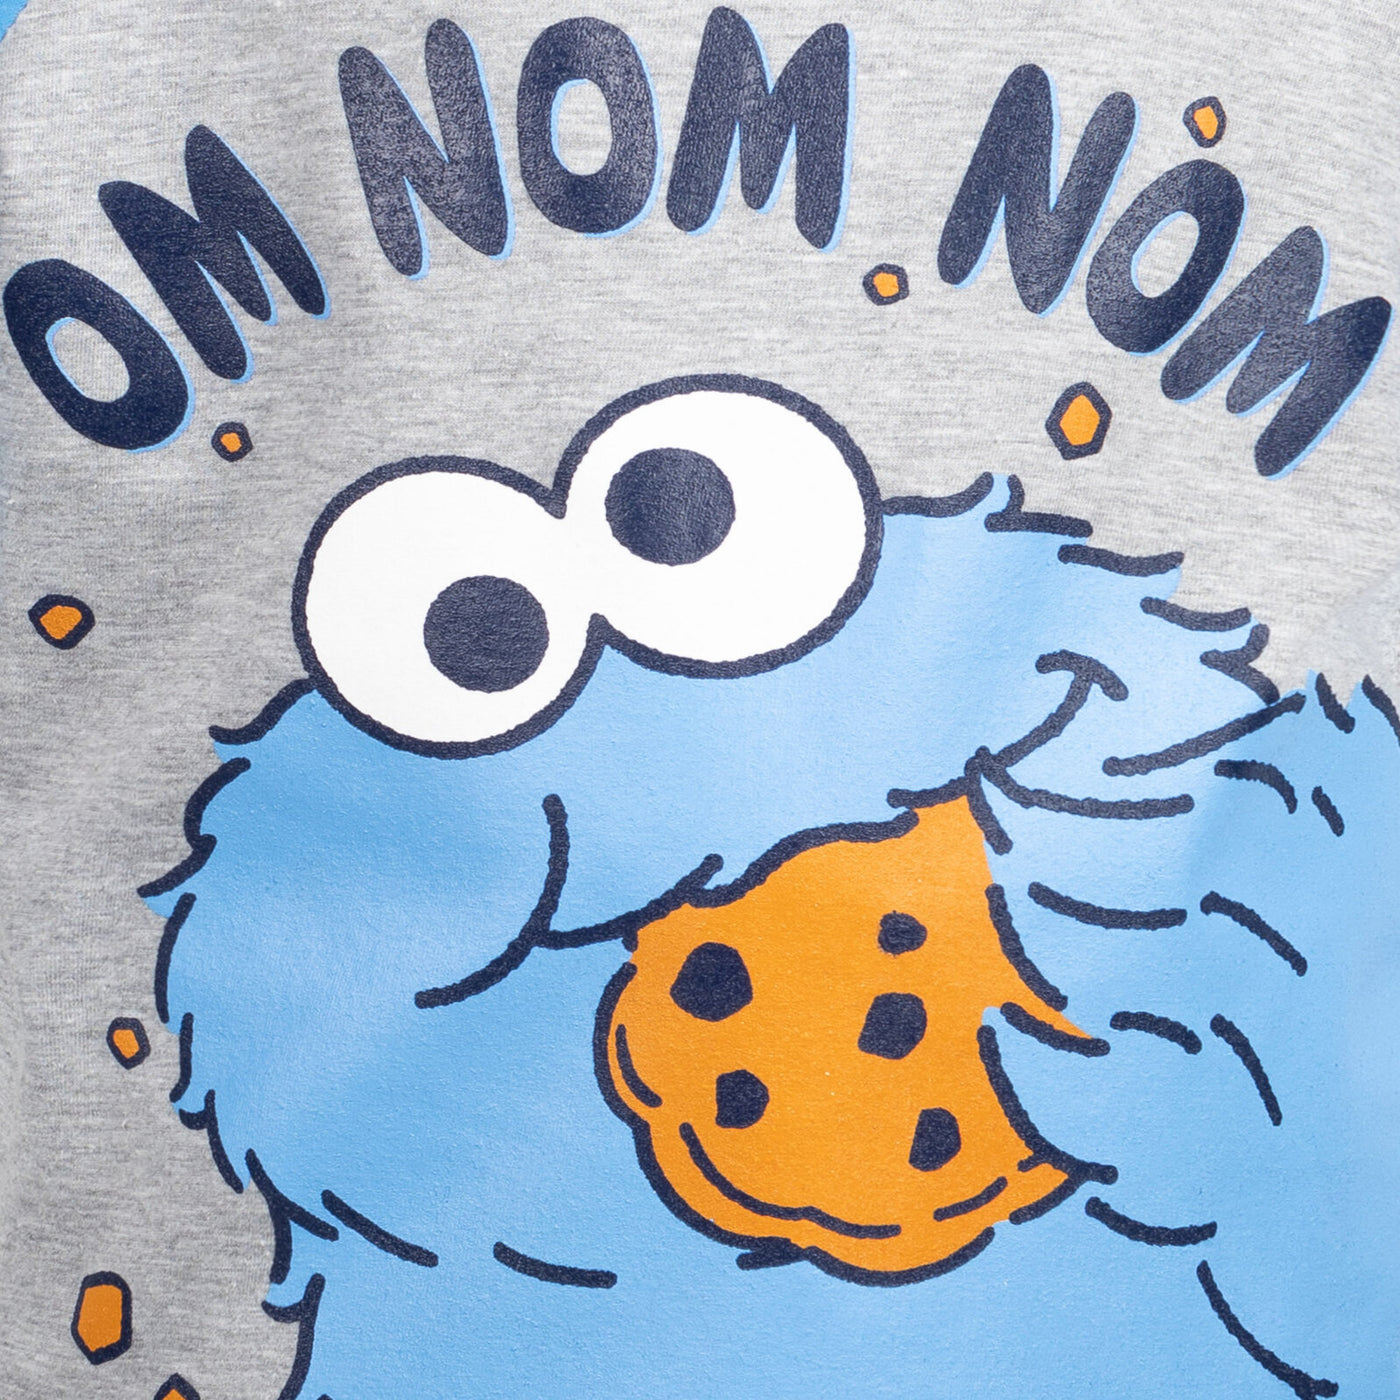 Sesame Street Cookie Monster T-Shirt and French Terry Shorts Outfit Set